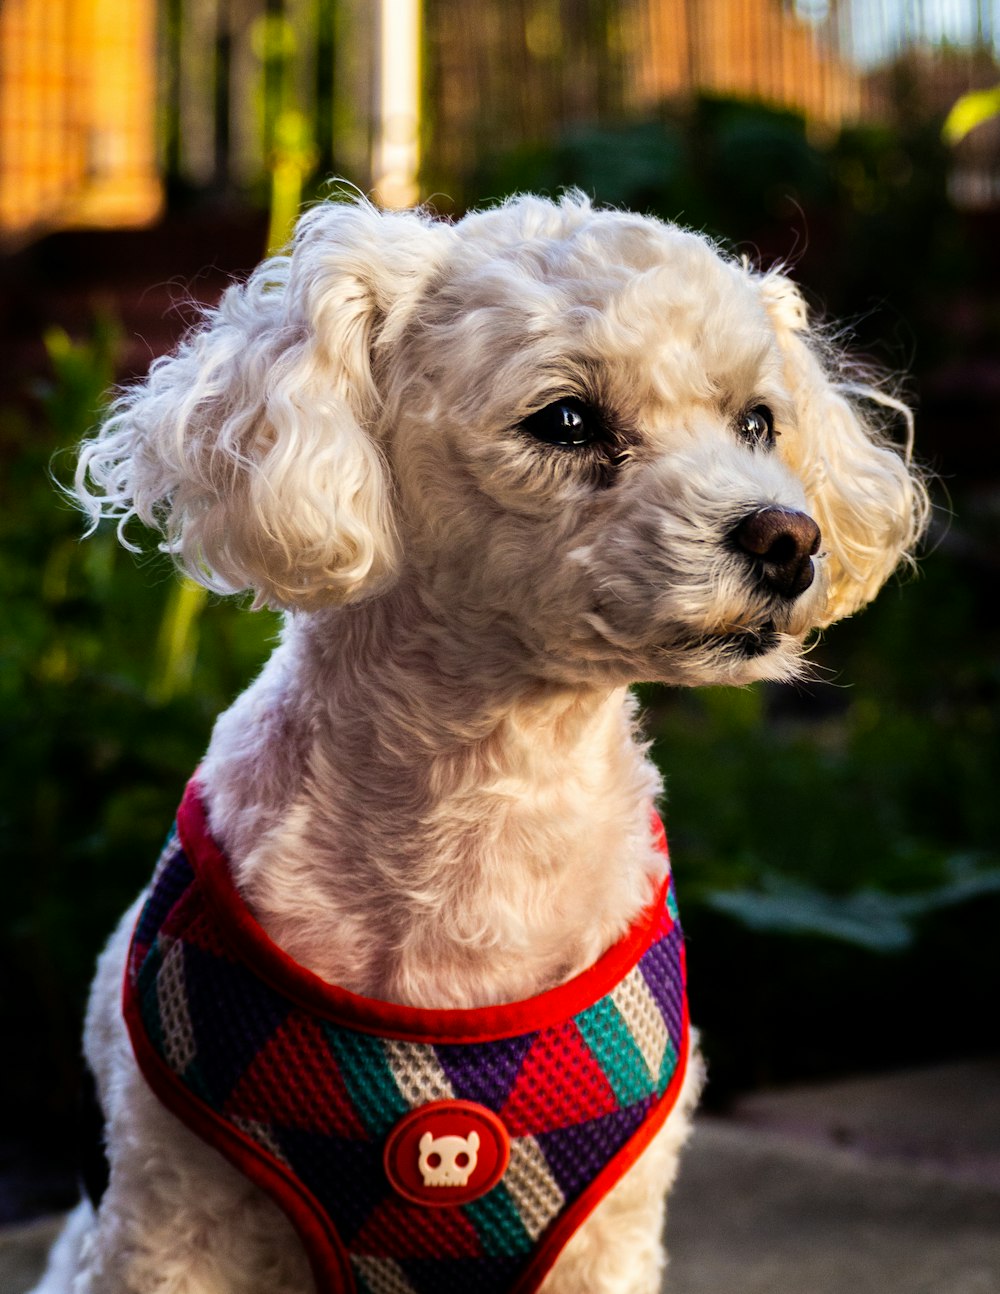 white poodle in red and black striped shirt